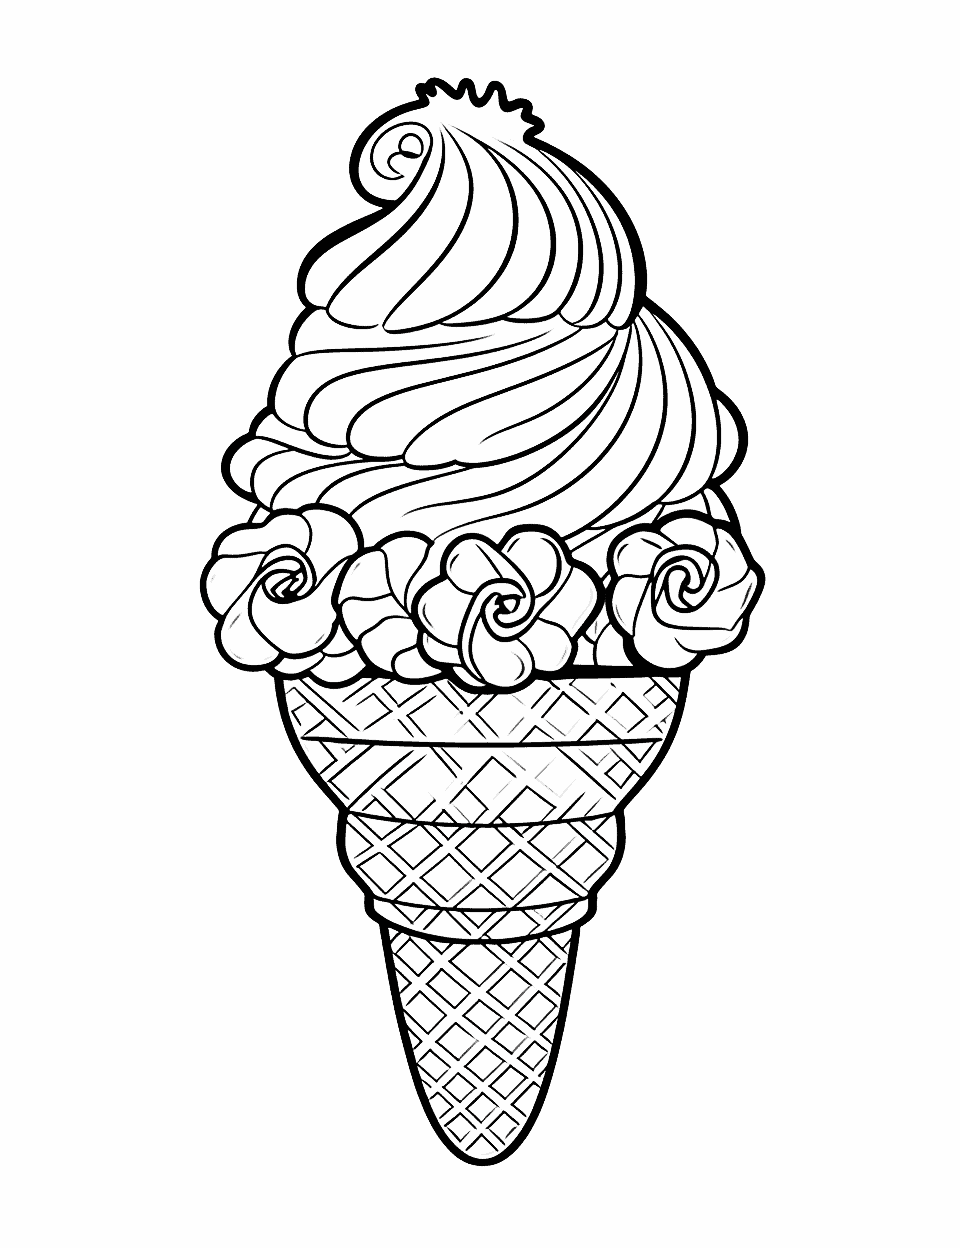 Full Size Ice Cream Coloring Page - A detailed, full-size coloring page of an ice cream.